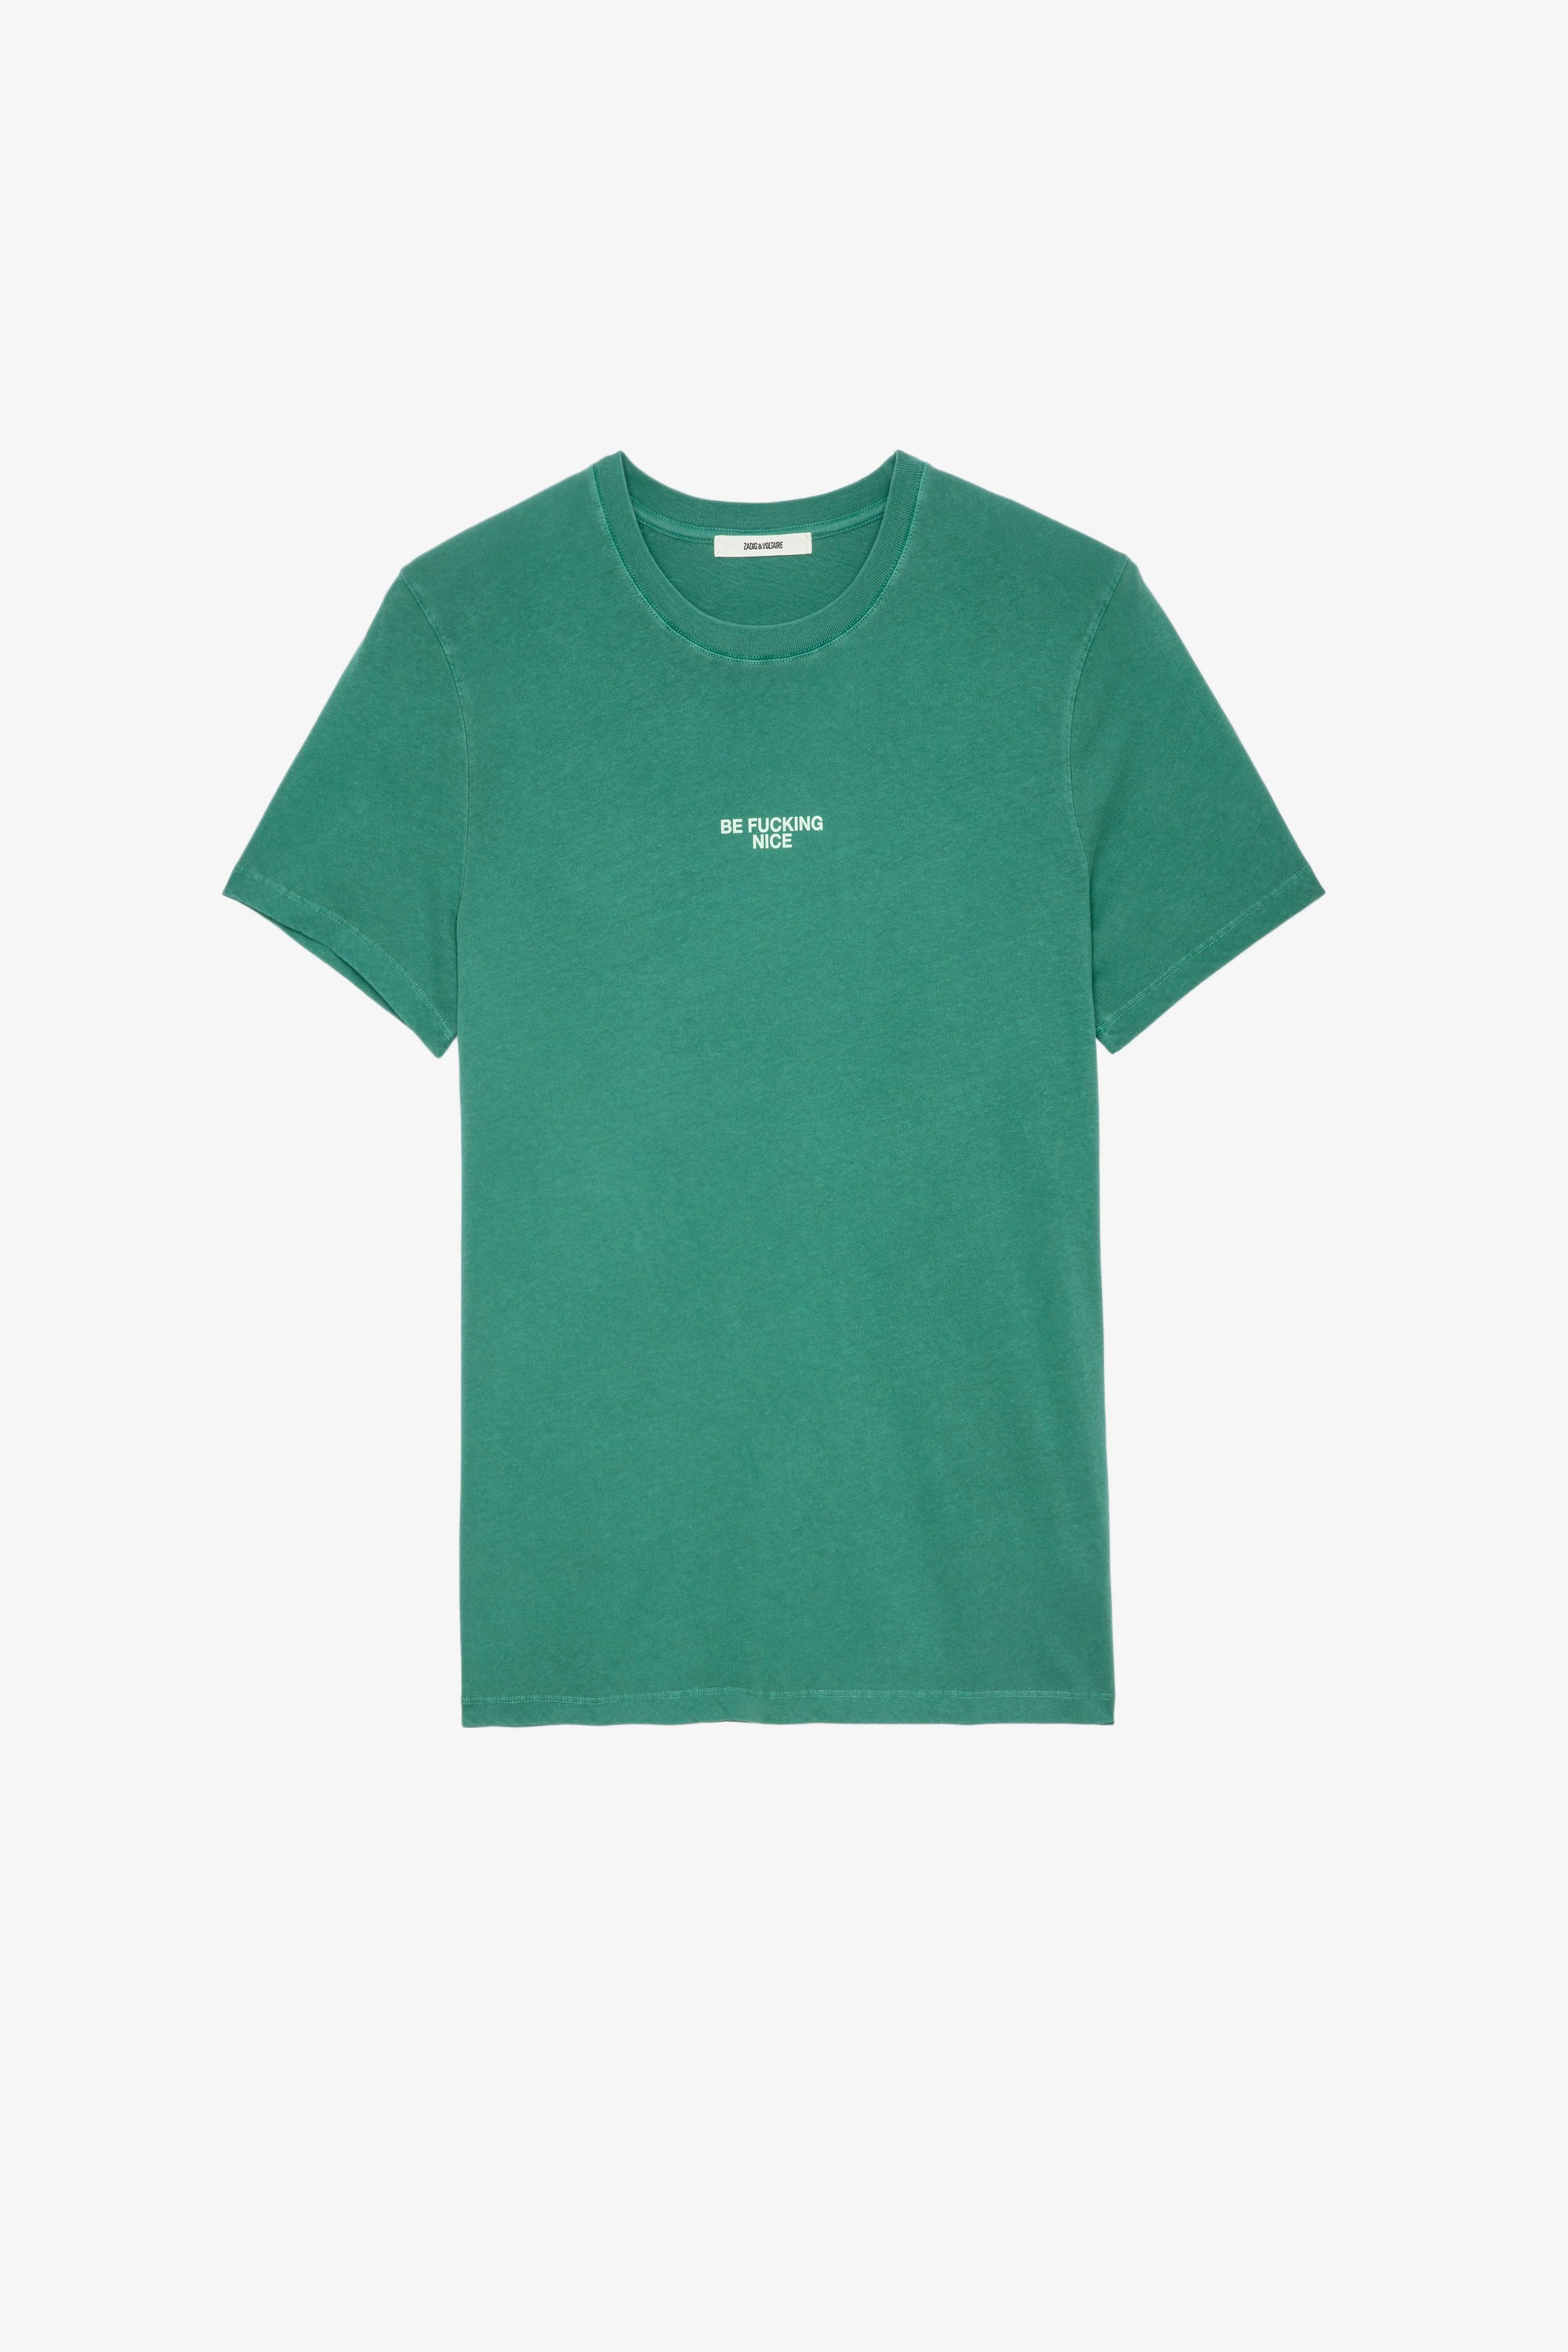 Ted T-Shirt Men’s green cotton T-shirt with “Be fucking nice” slogan